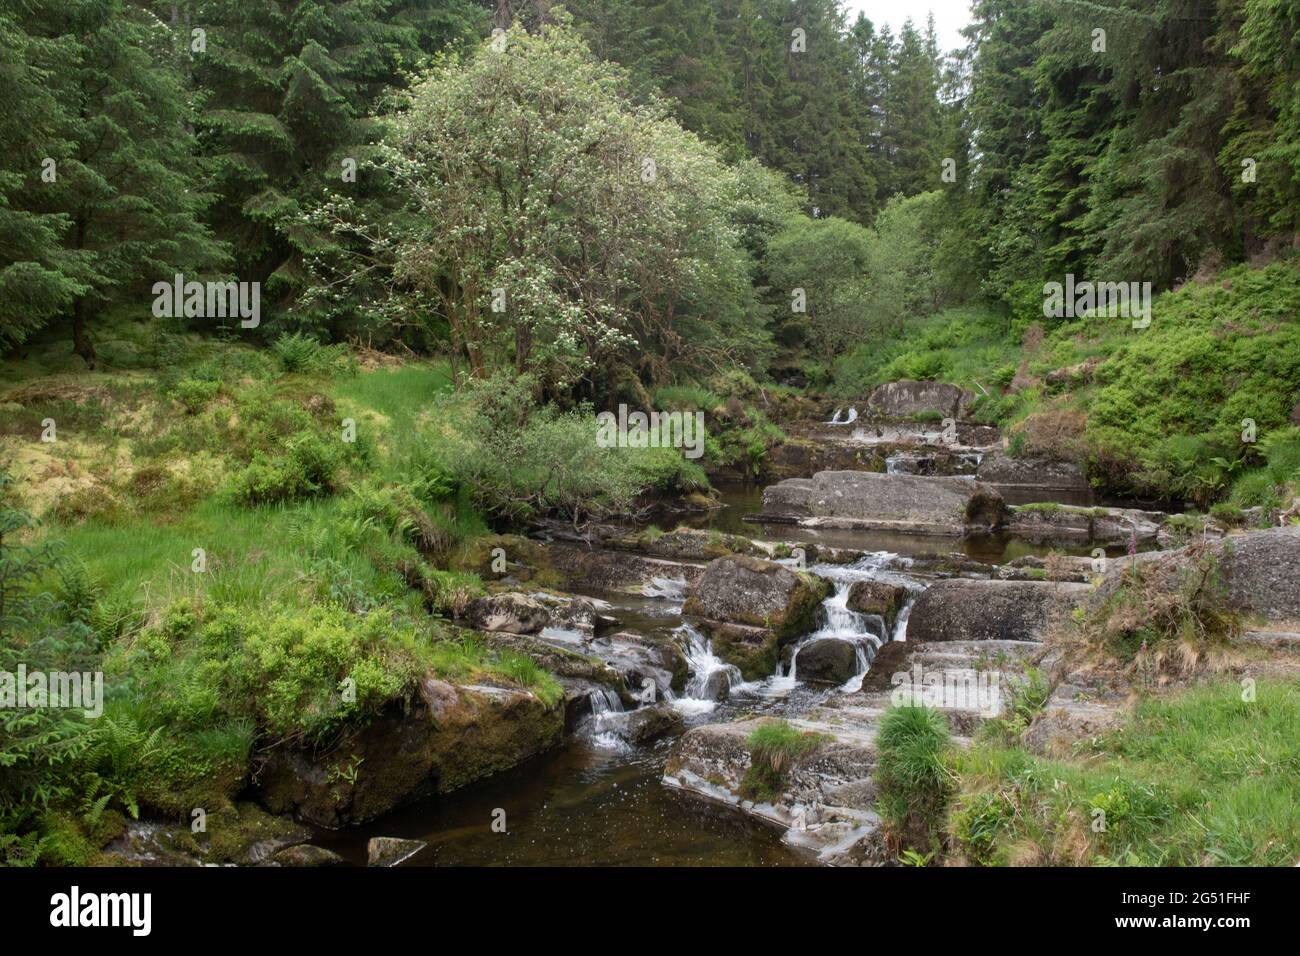 The River Severn in the Hafren Forest, a couple of miles from its source on the mountains of Wales, UK Stock Photo